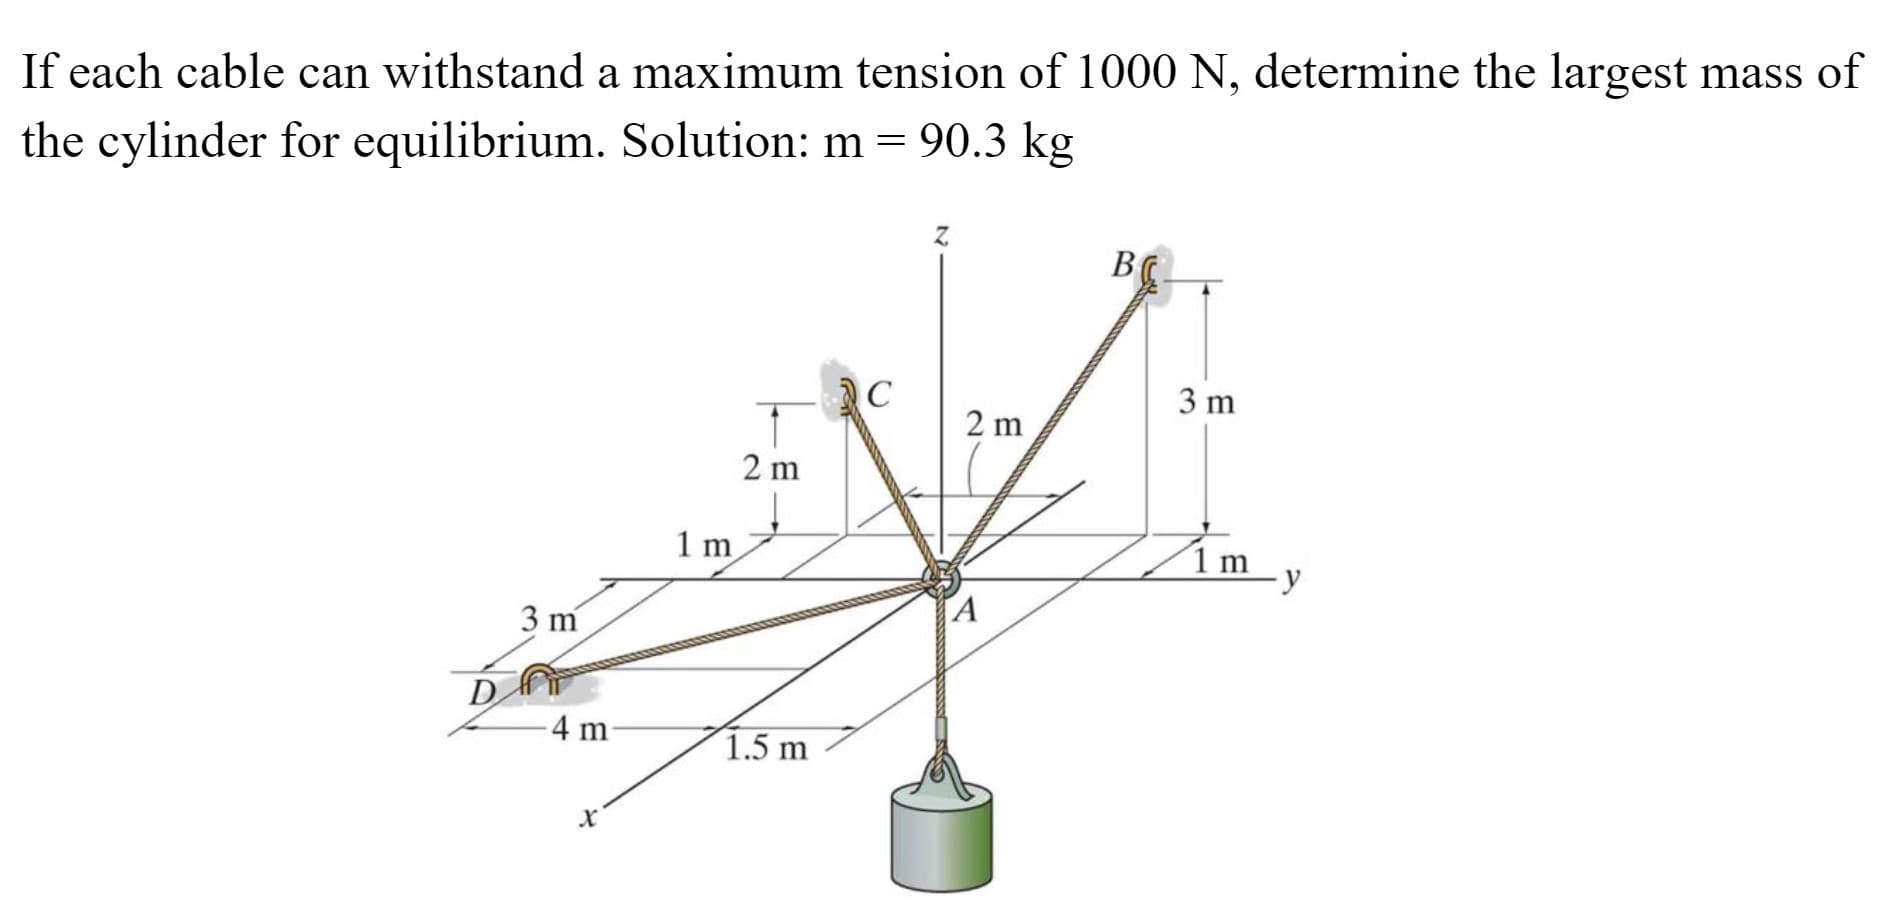 If each cable can withstand a maximum tension of 1000 N, determine the largest mass o
the cylinder for equilibrium. Solution: m = 90.3 kg
B
C
3 m
2 m
2 m
1 m
1m
A
3 m
D
4 m
1.5 m
